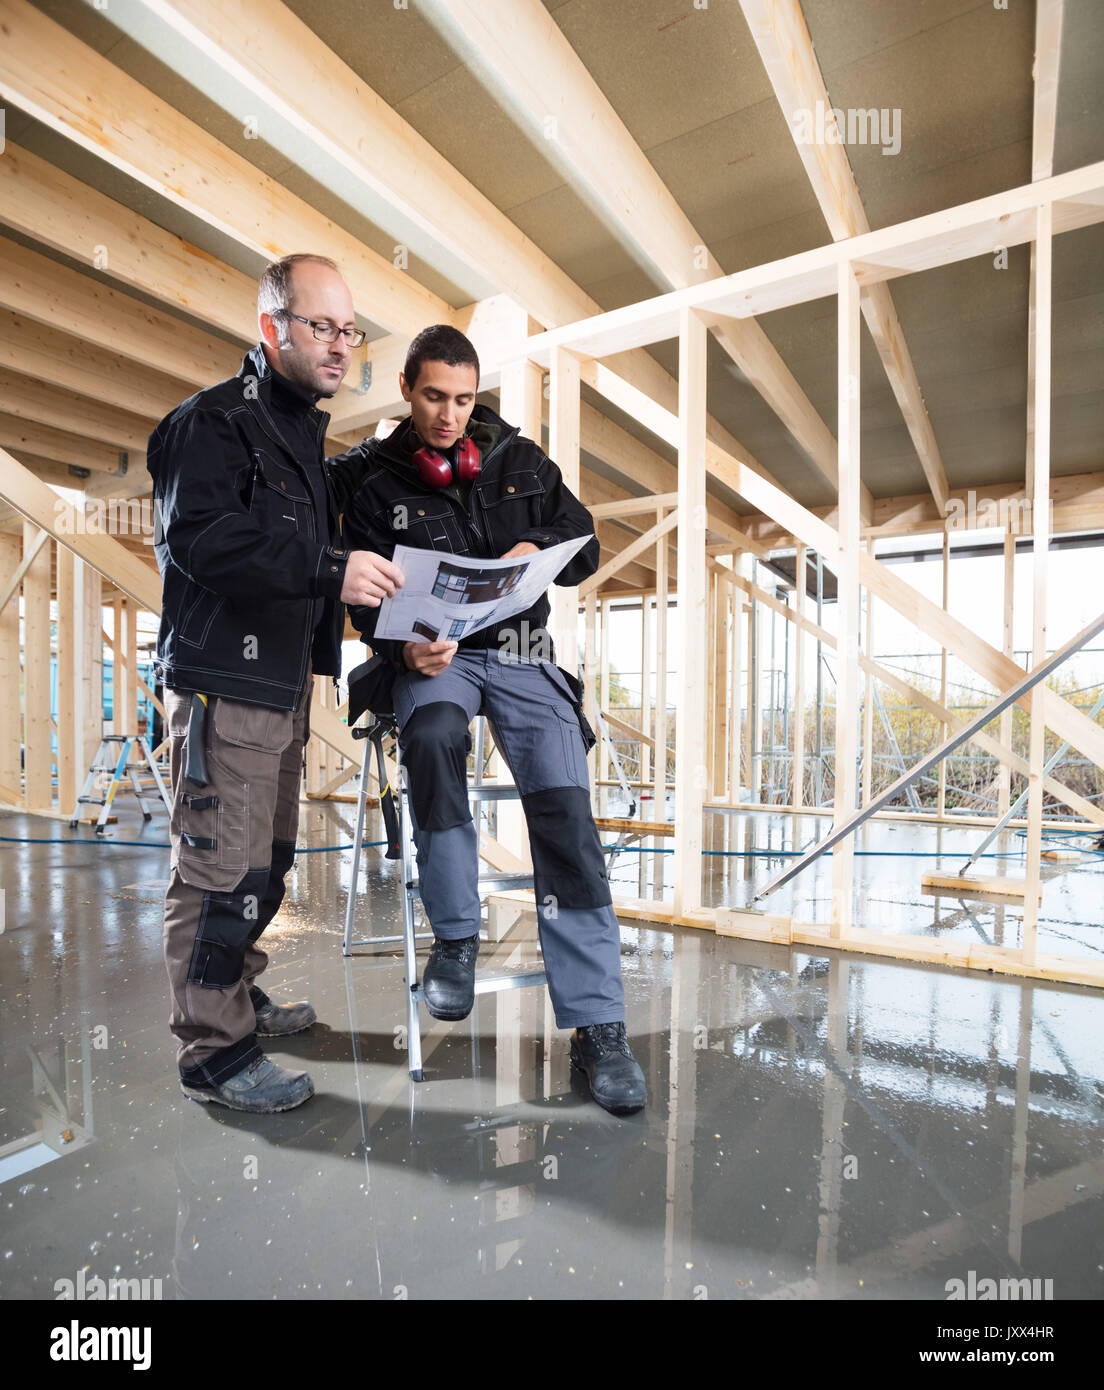 Full Length Of Carpenters With Plan At Construction Site Stock Photo